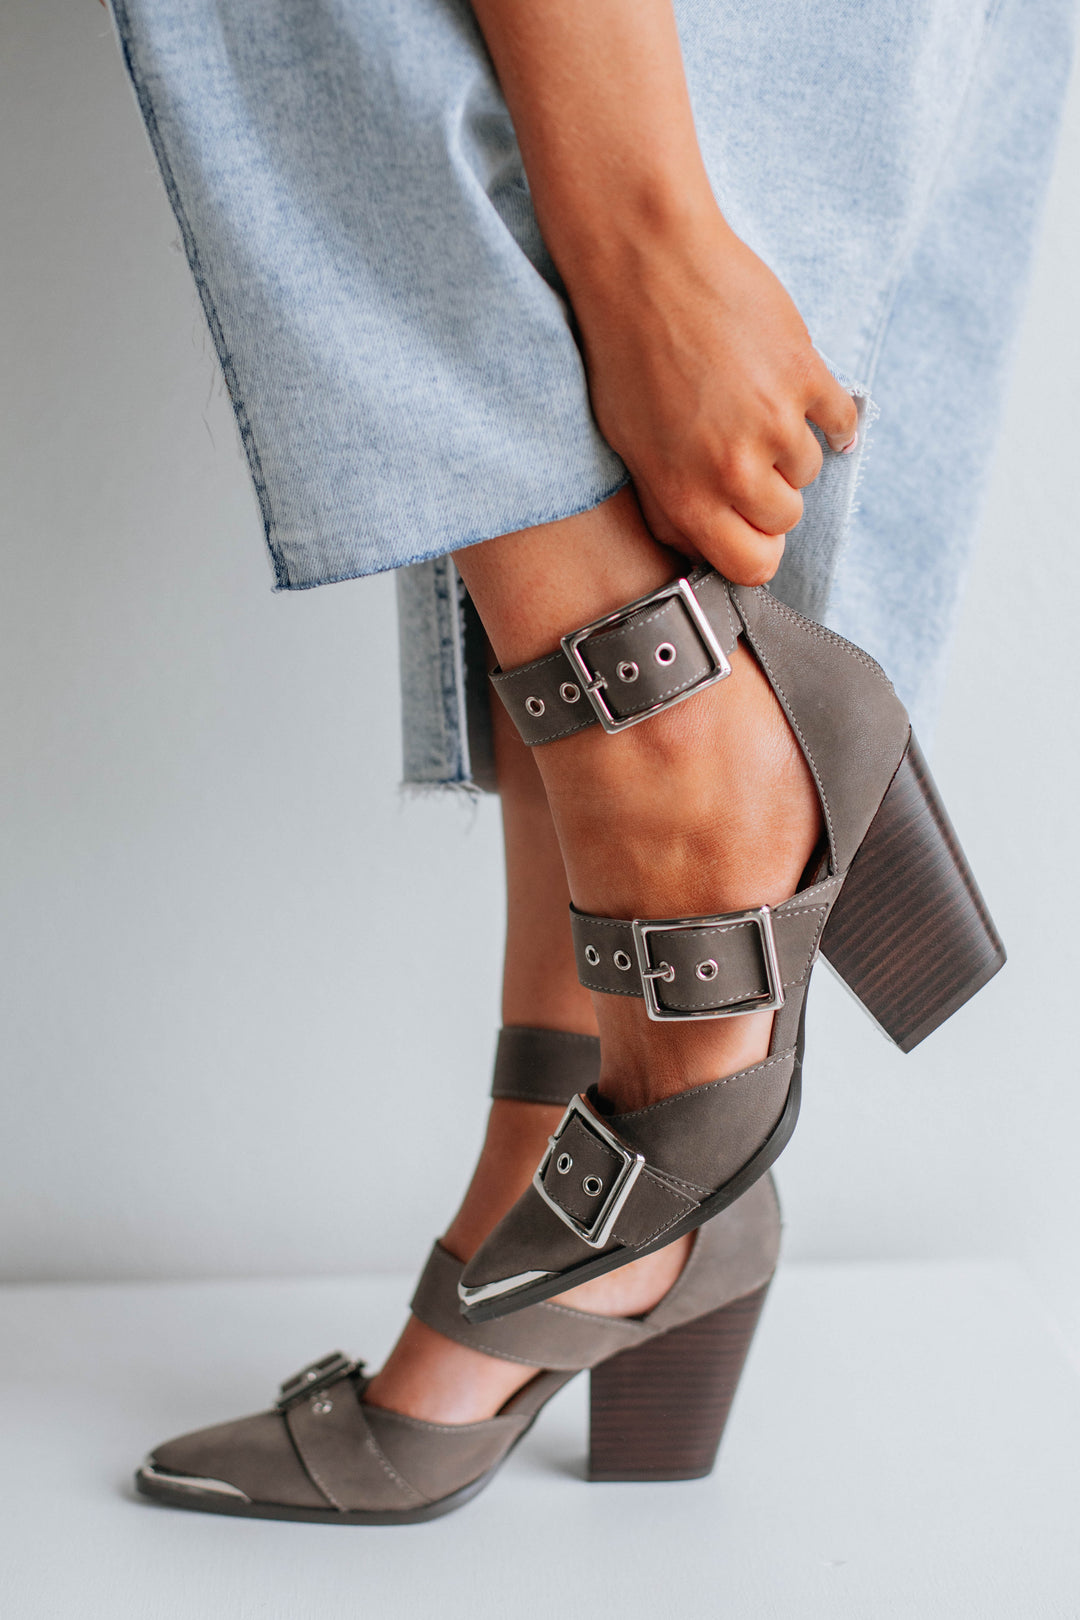 Proving My Point Heels - Charcoal